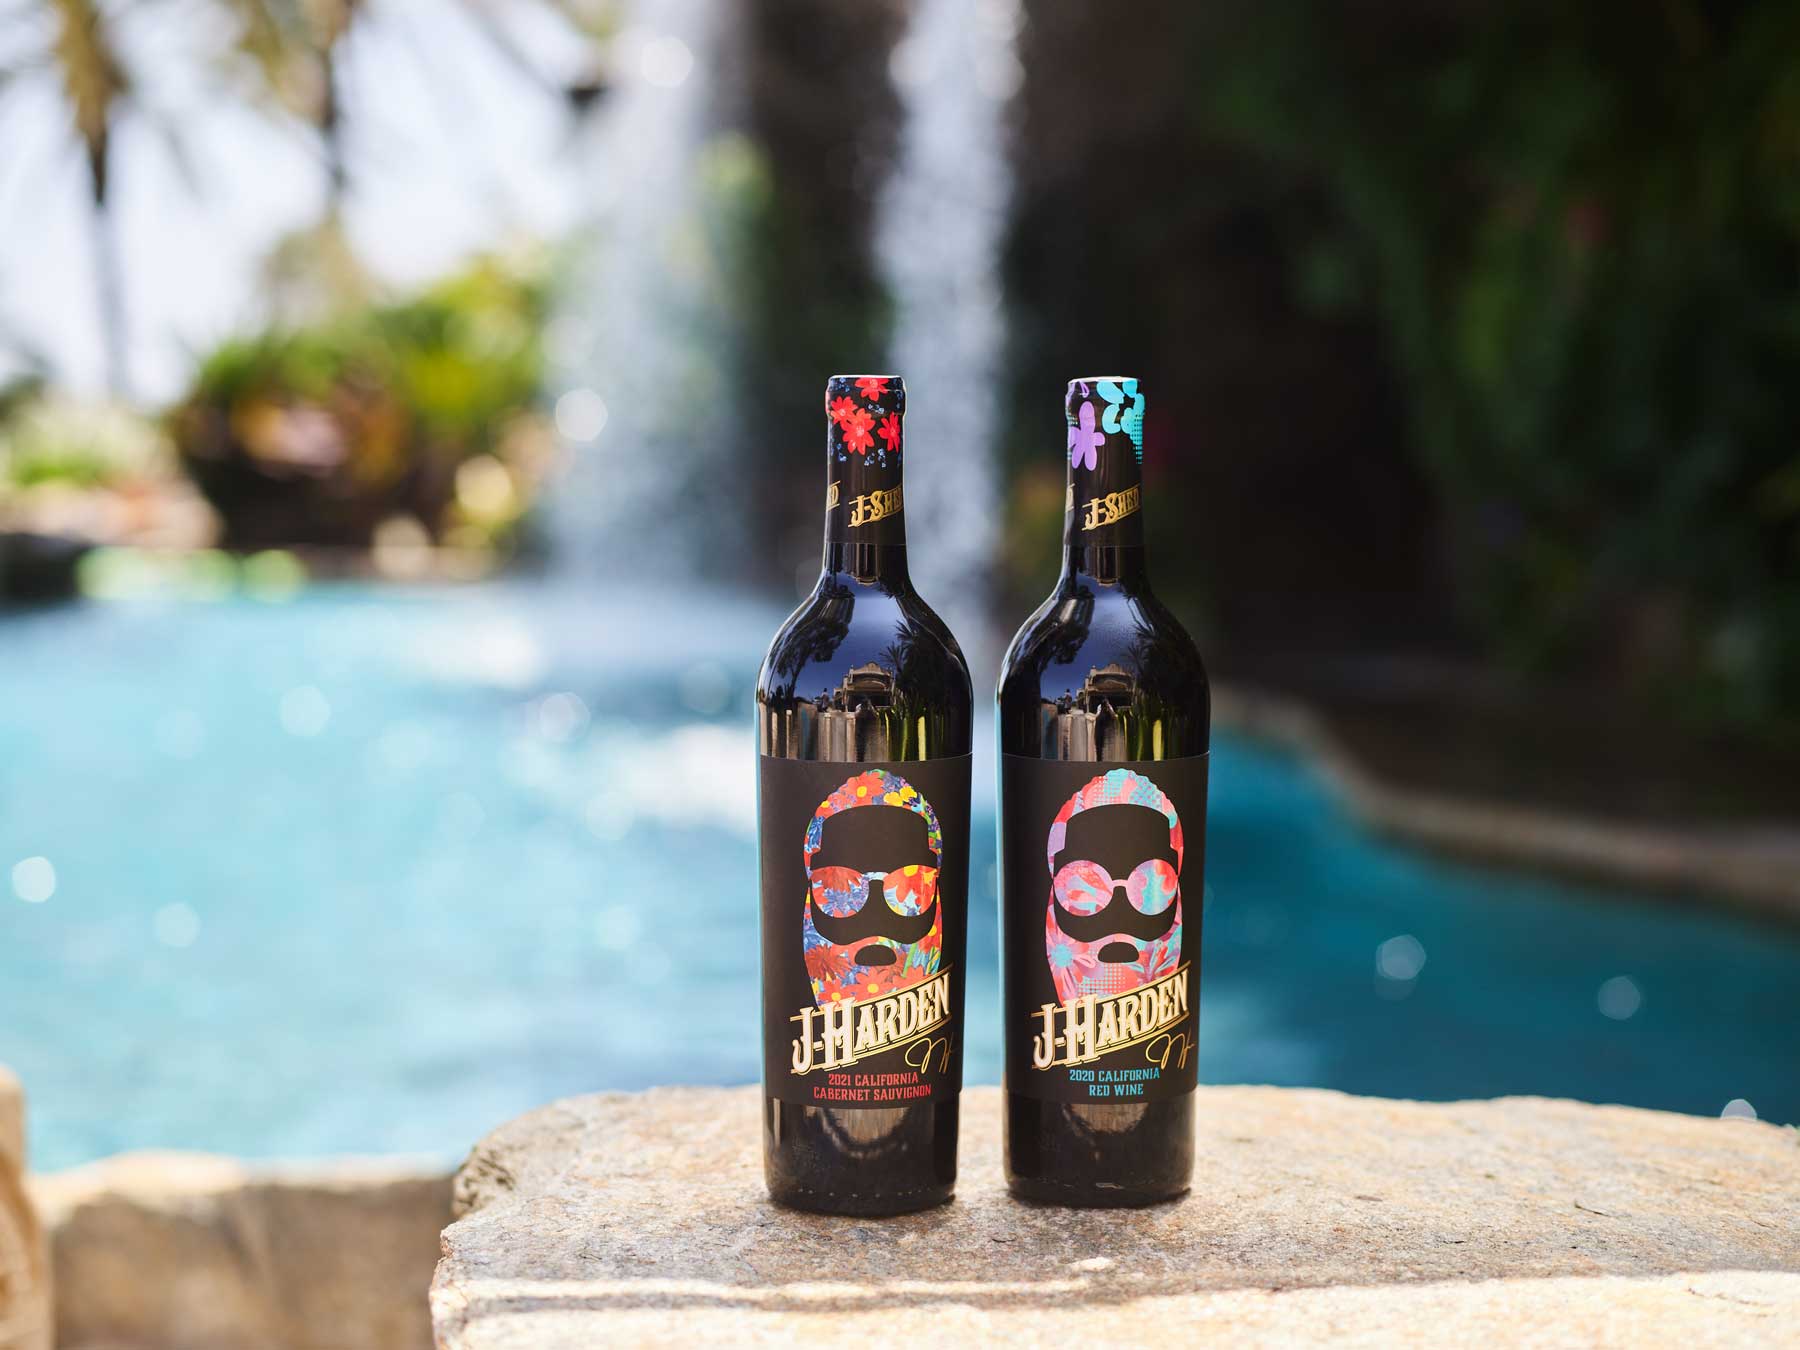 two bottles of J-Harden x J-Shed wine in front of a pool